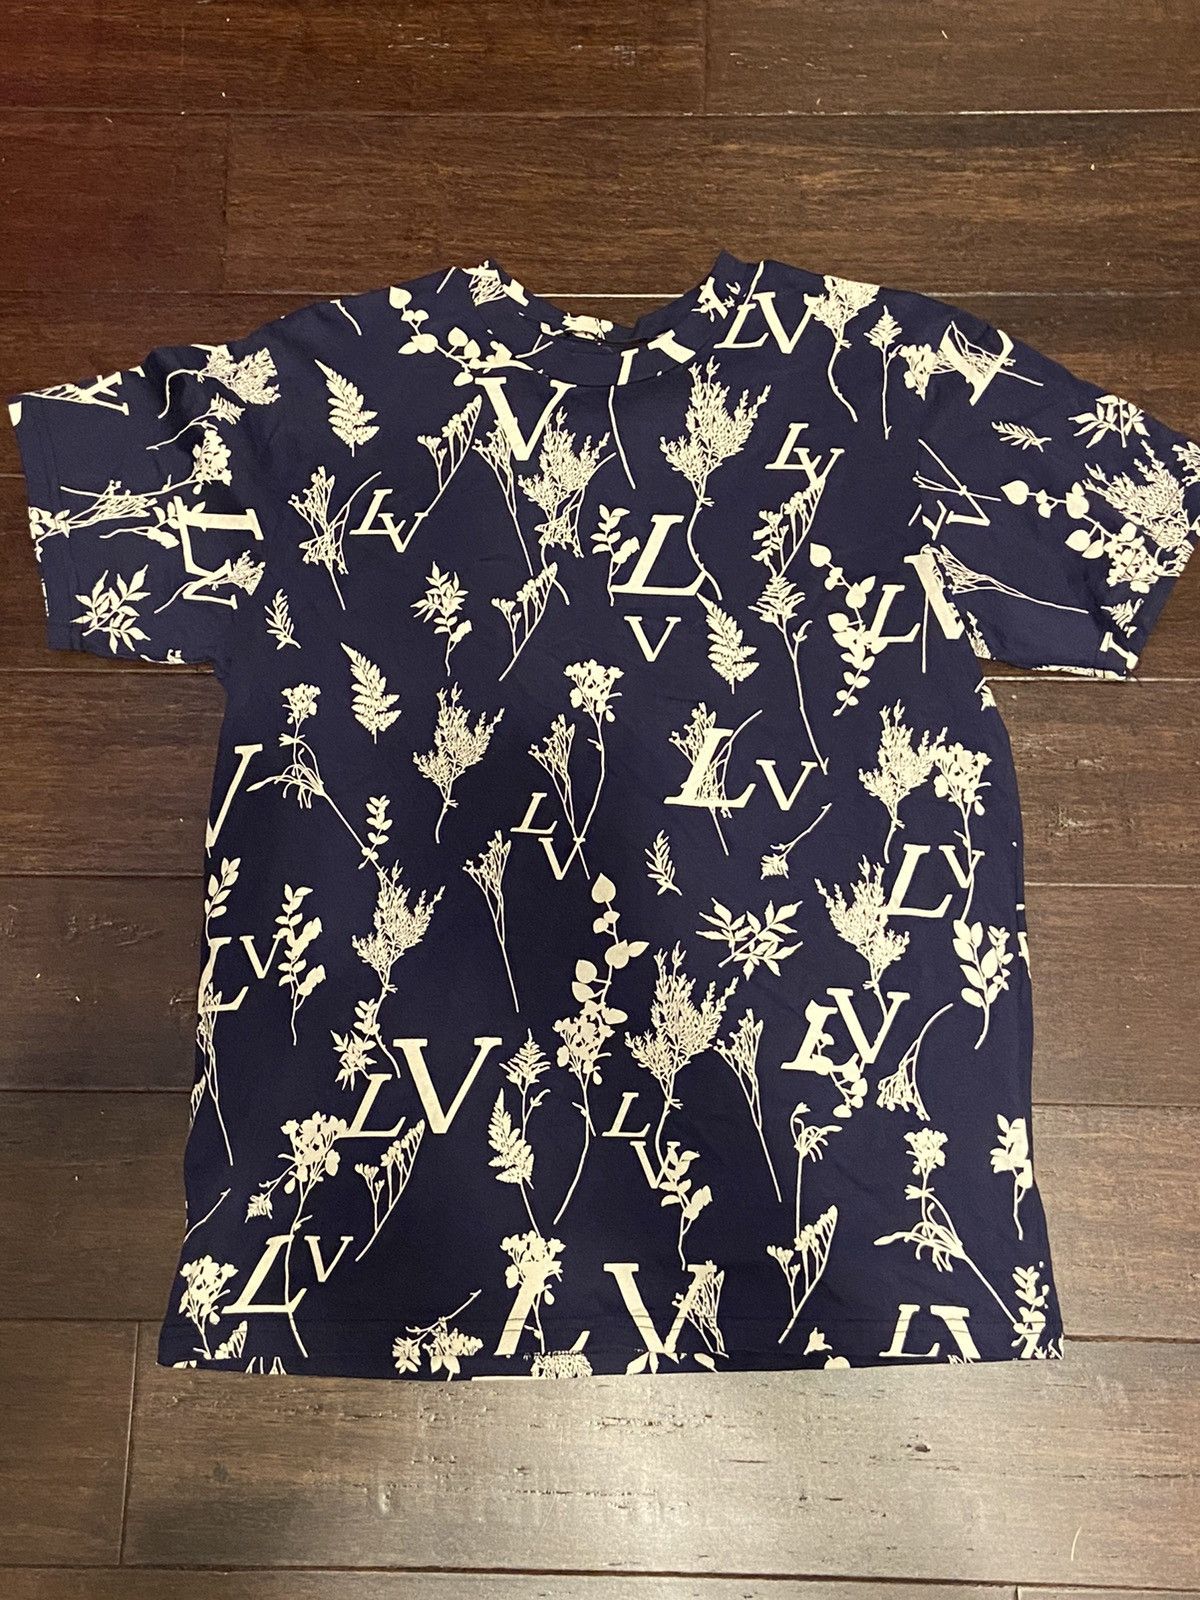 Louis Vuitton Leaf Discharge T-shirt is a M U S T have and now